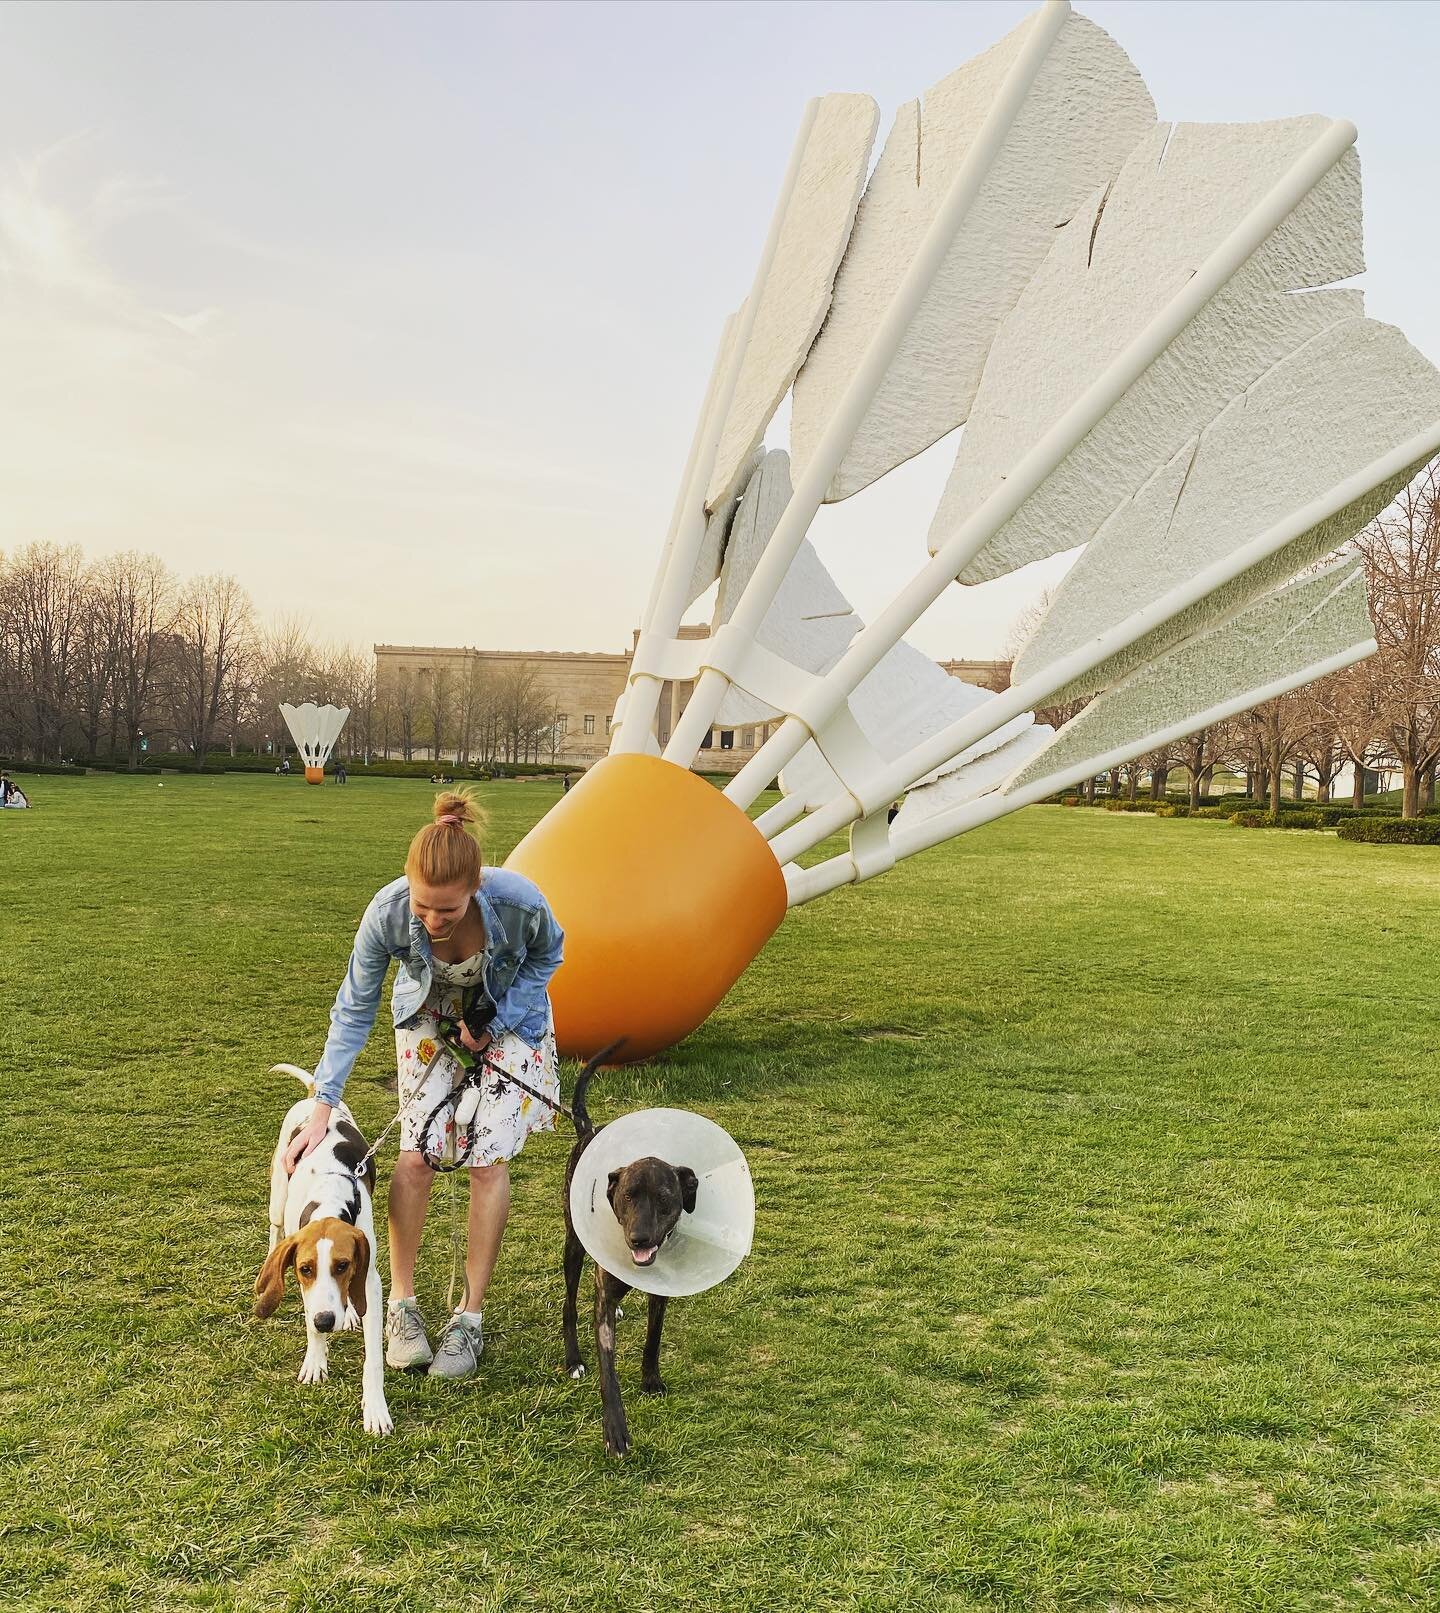 Cone head and Humphrey had a rough week, but at least they live in a great town with some great art. Photocred: @mcmedles
.
@nelsonatkins
#kansascitydogs #sunsetwalks #artsydogs #dogsofinsta